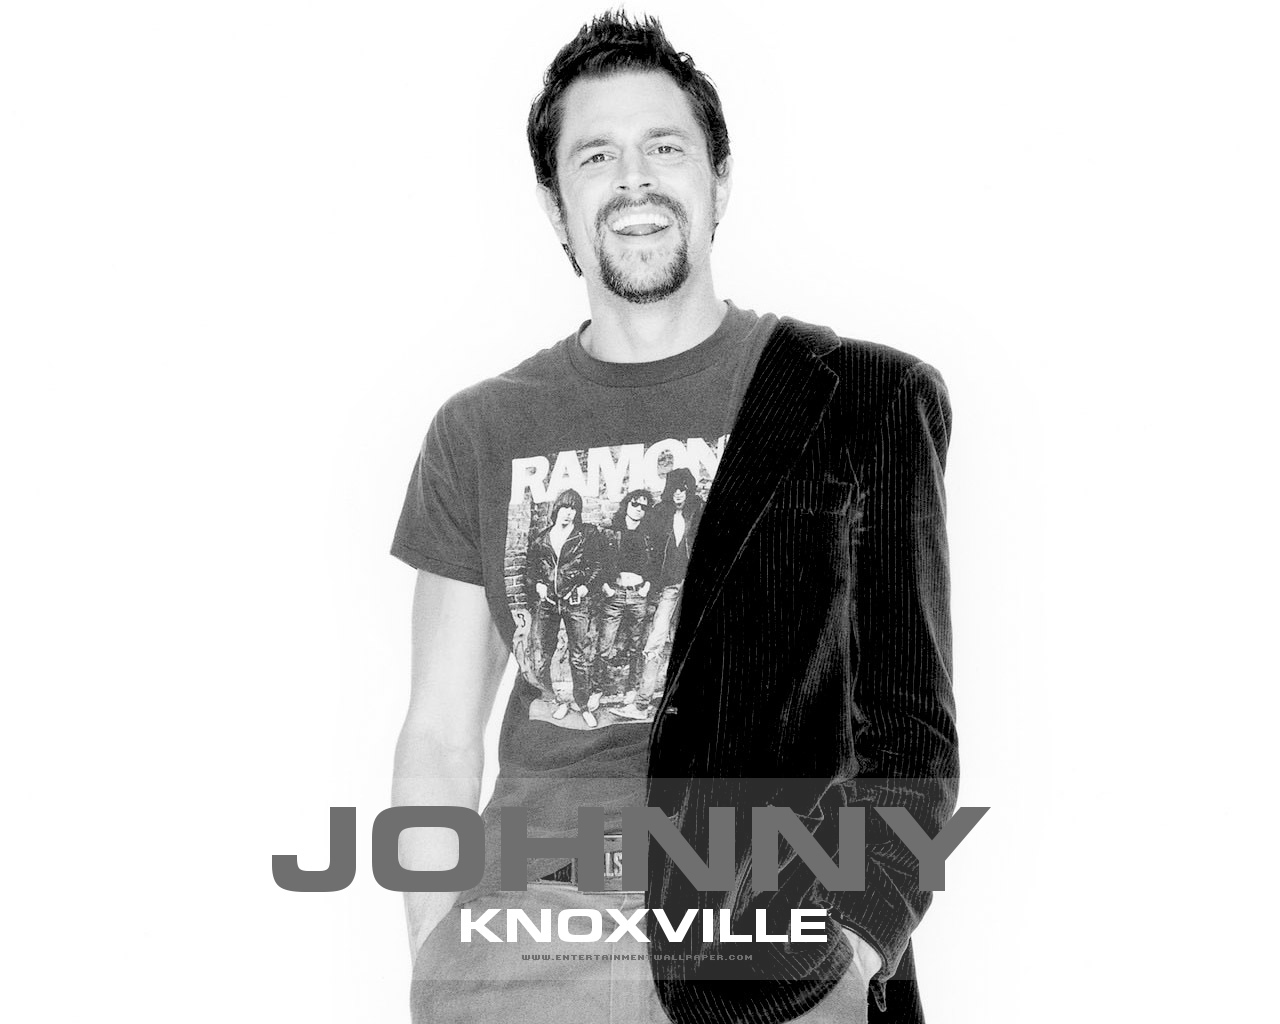 Johnny Knoxville - Johnny Knoxville Wallpaper (1339168) - Fanpop